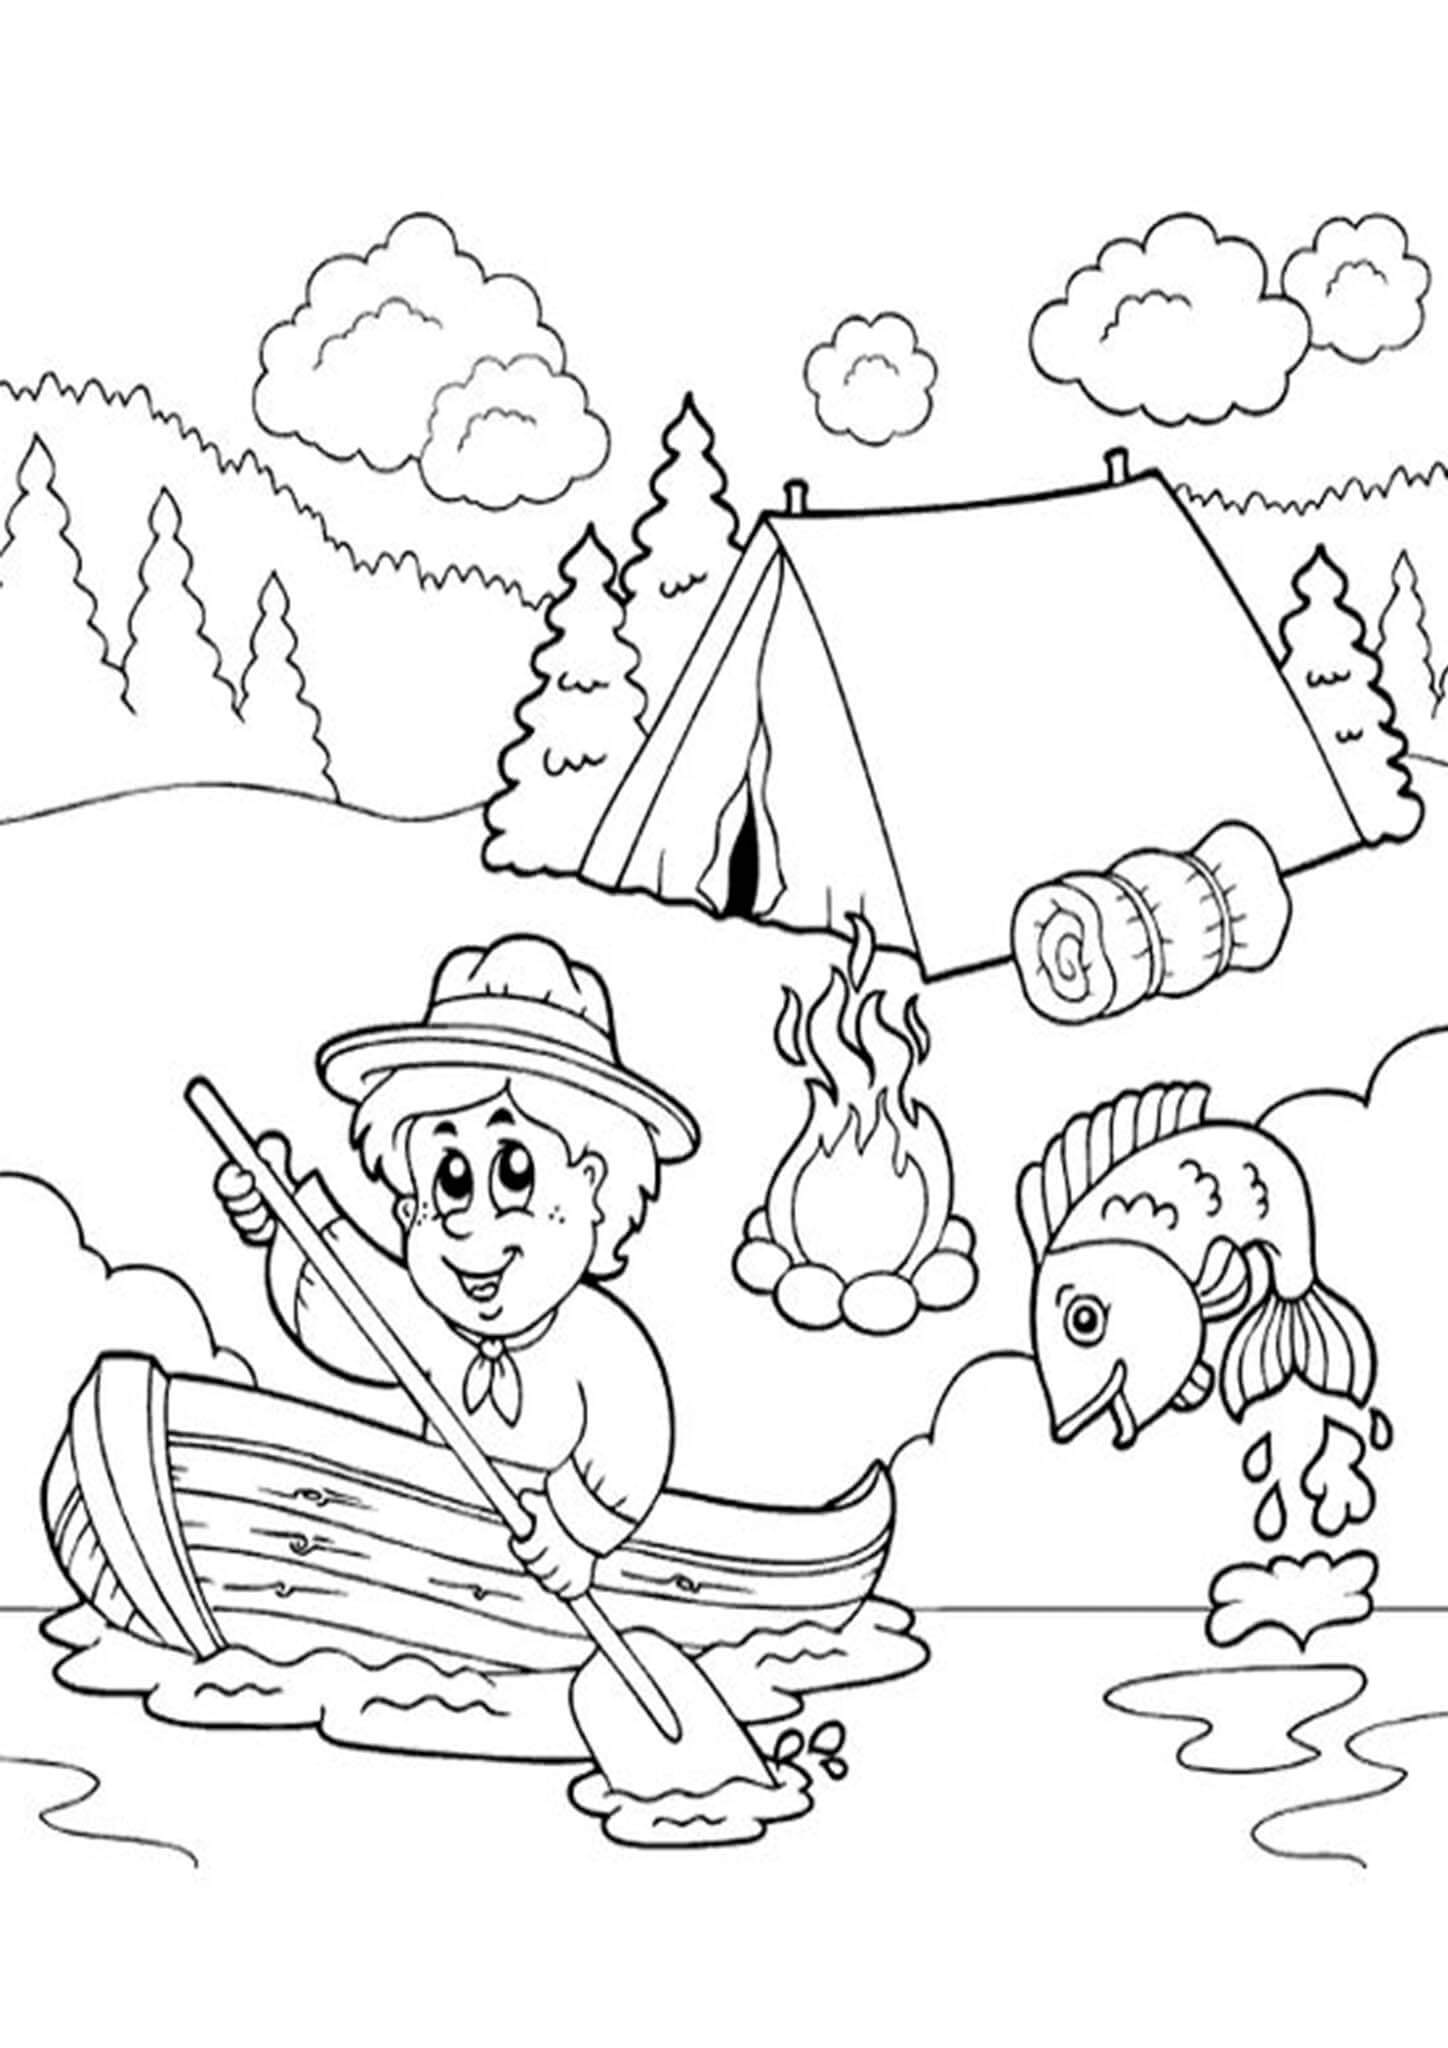  Free Printable Camping Coloring Pages 